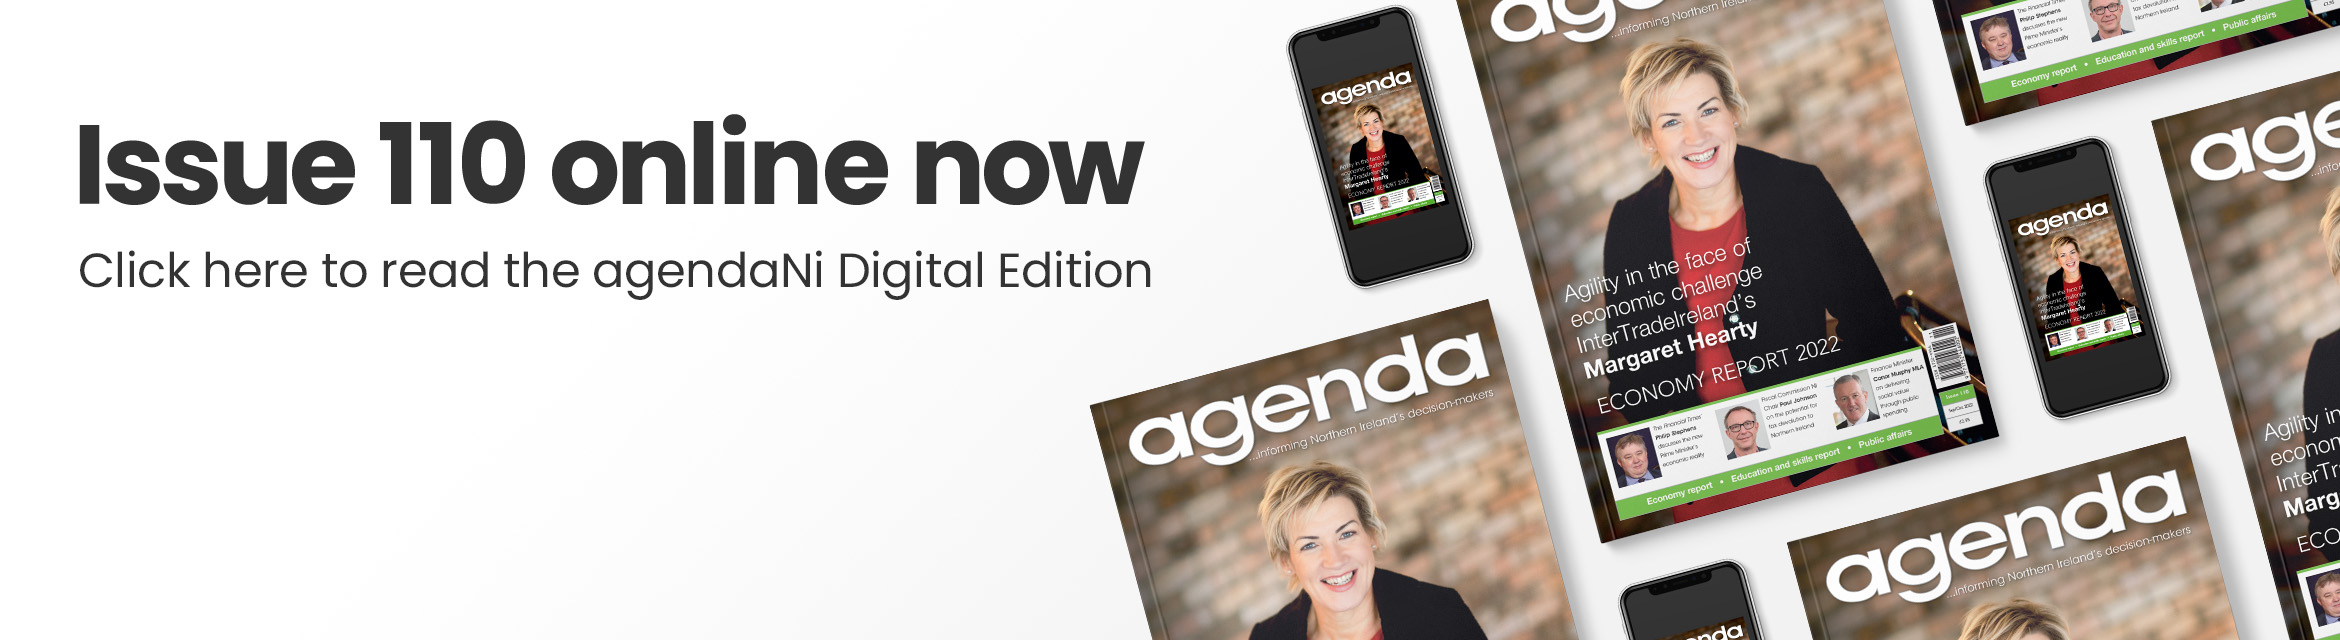 Issue 110 online now. Click here to read the agendaNi Digital Edition.